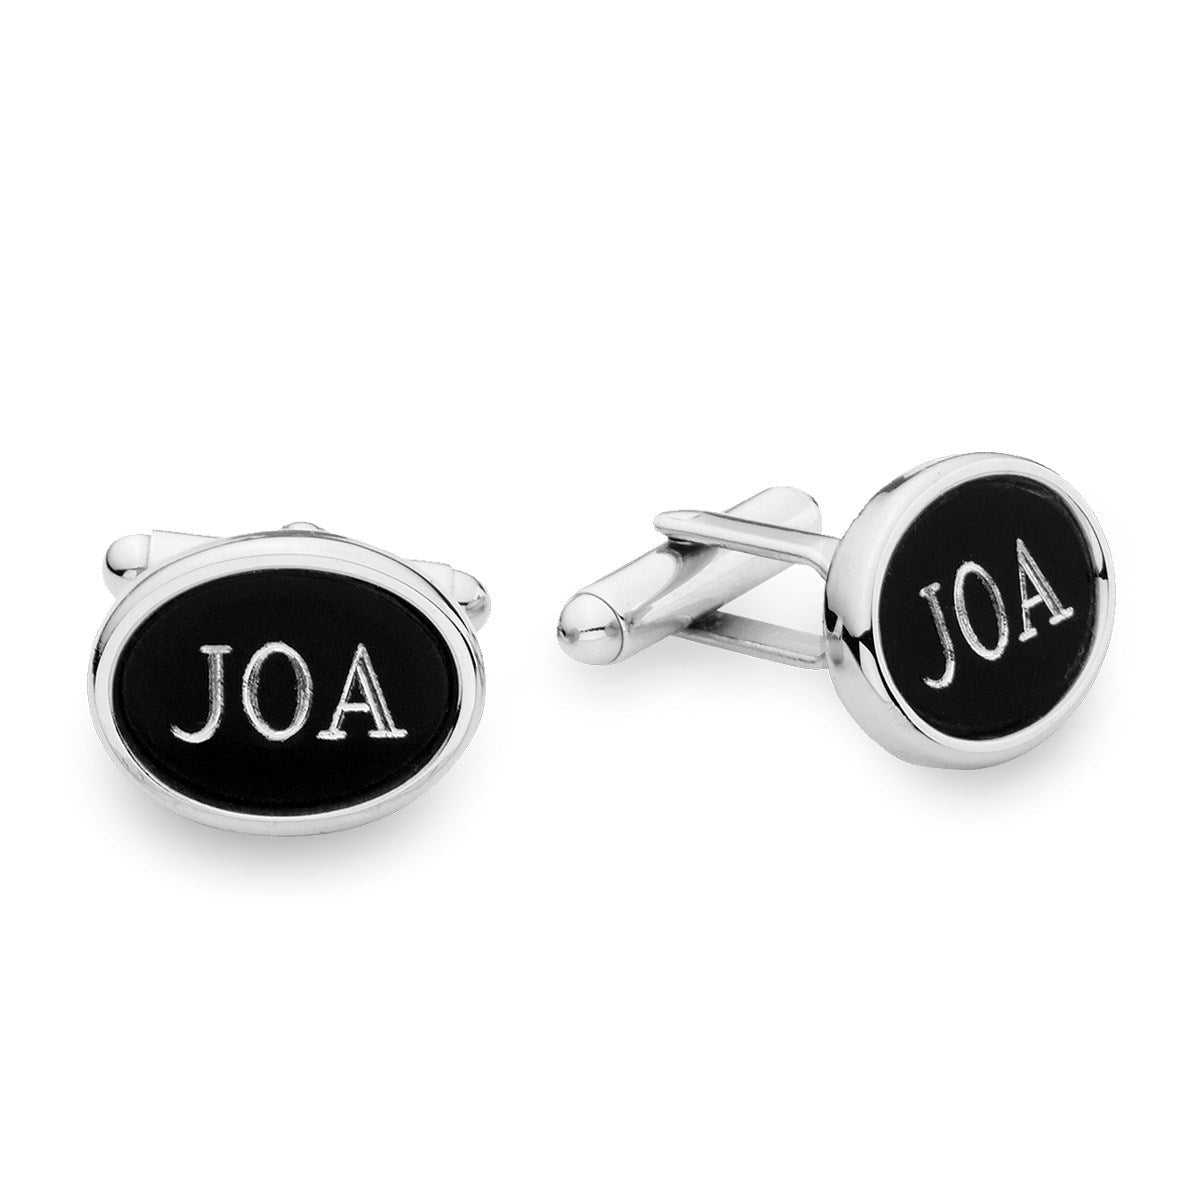 A matte black oval cufflinks displayed on a neutral white background.